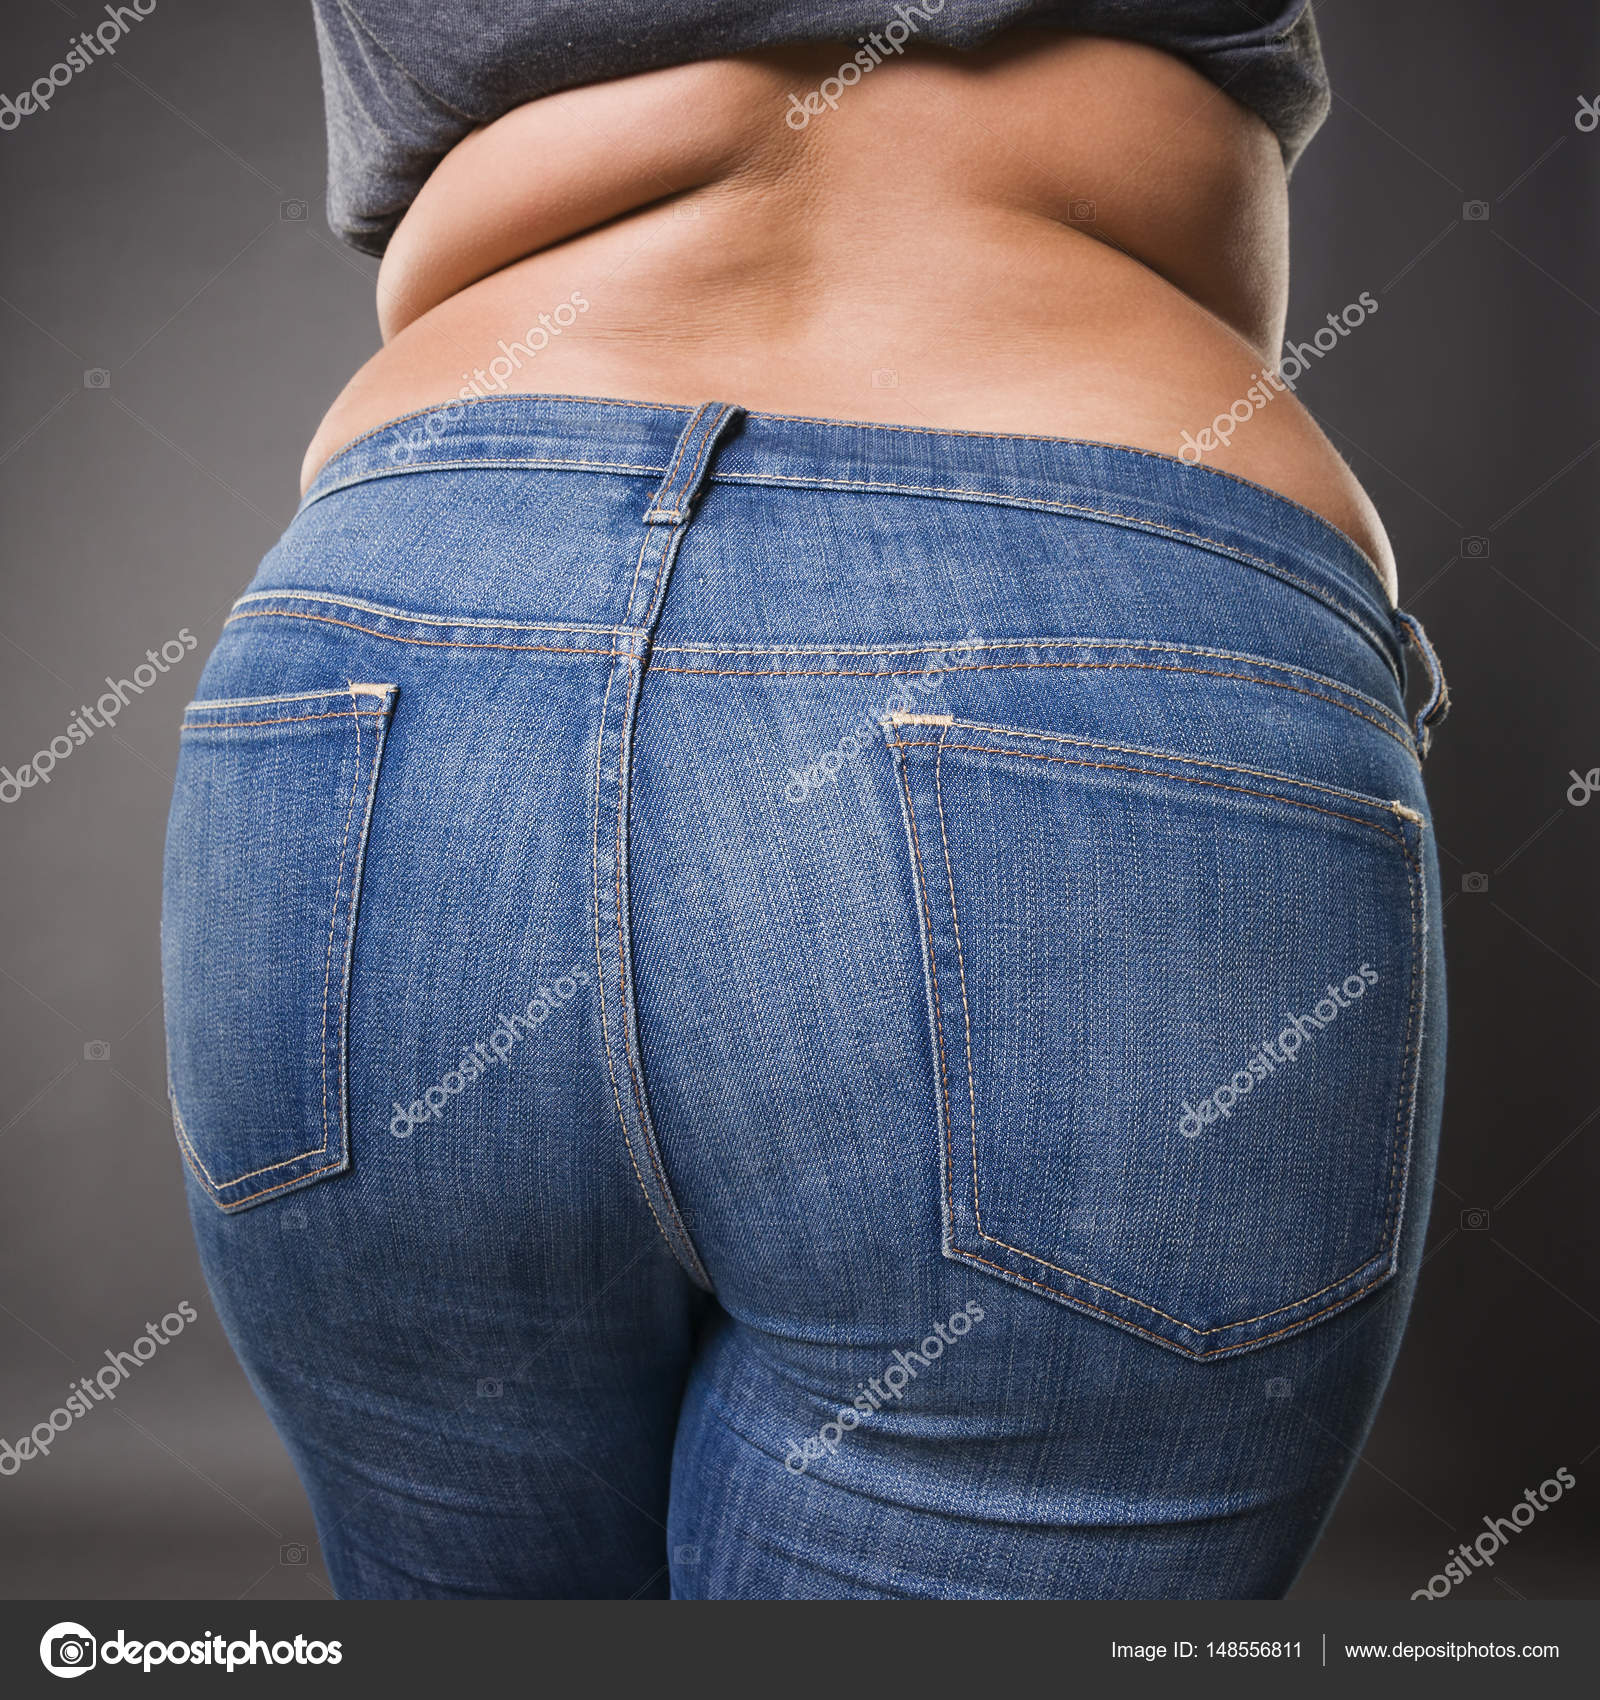 Big Fat Ass Pictures